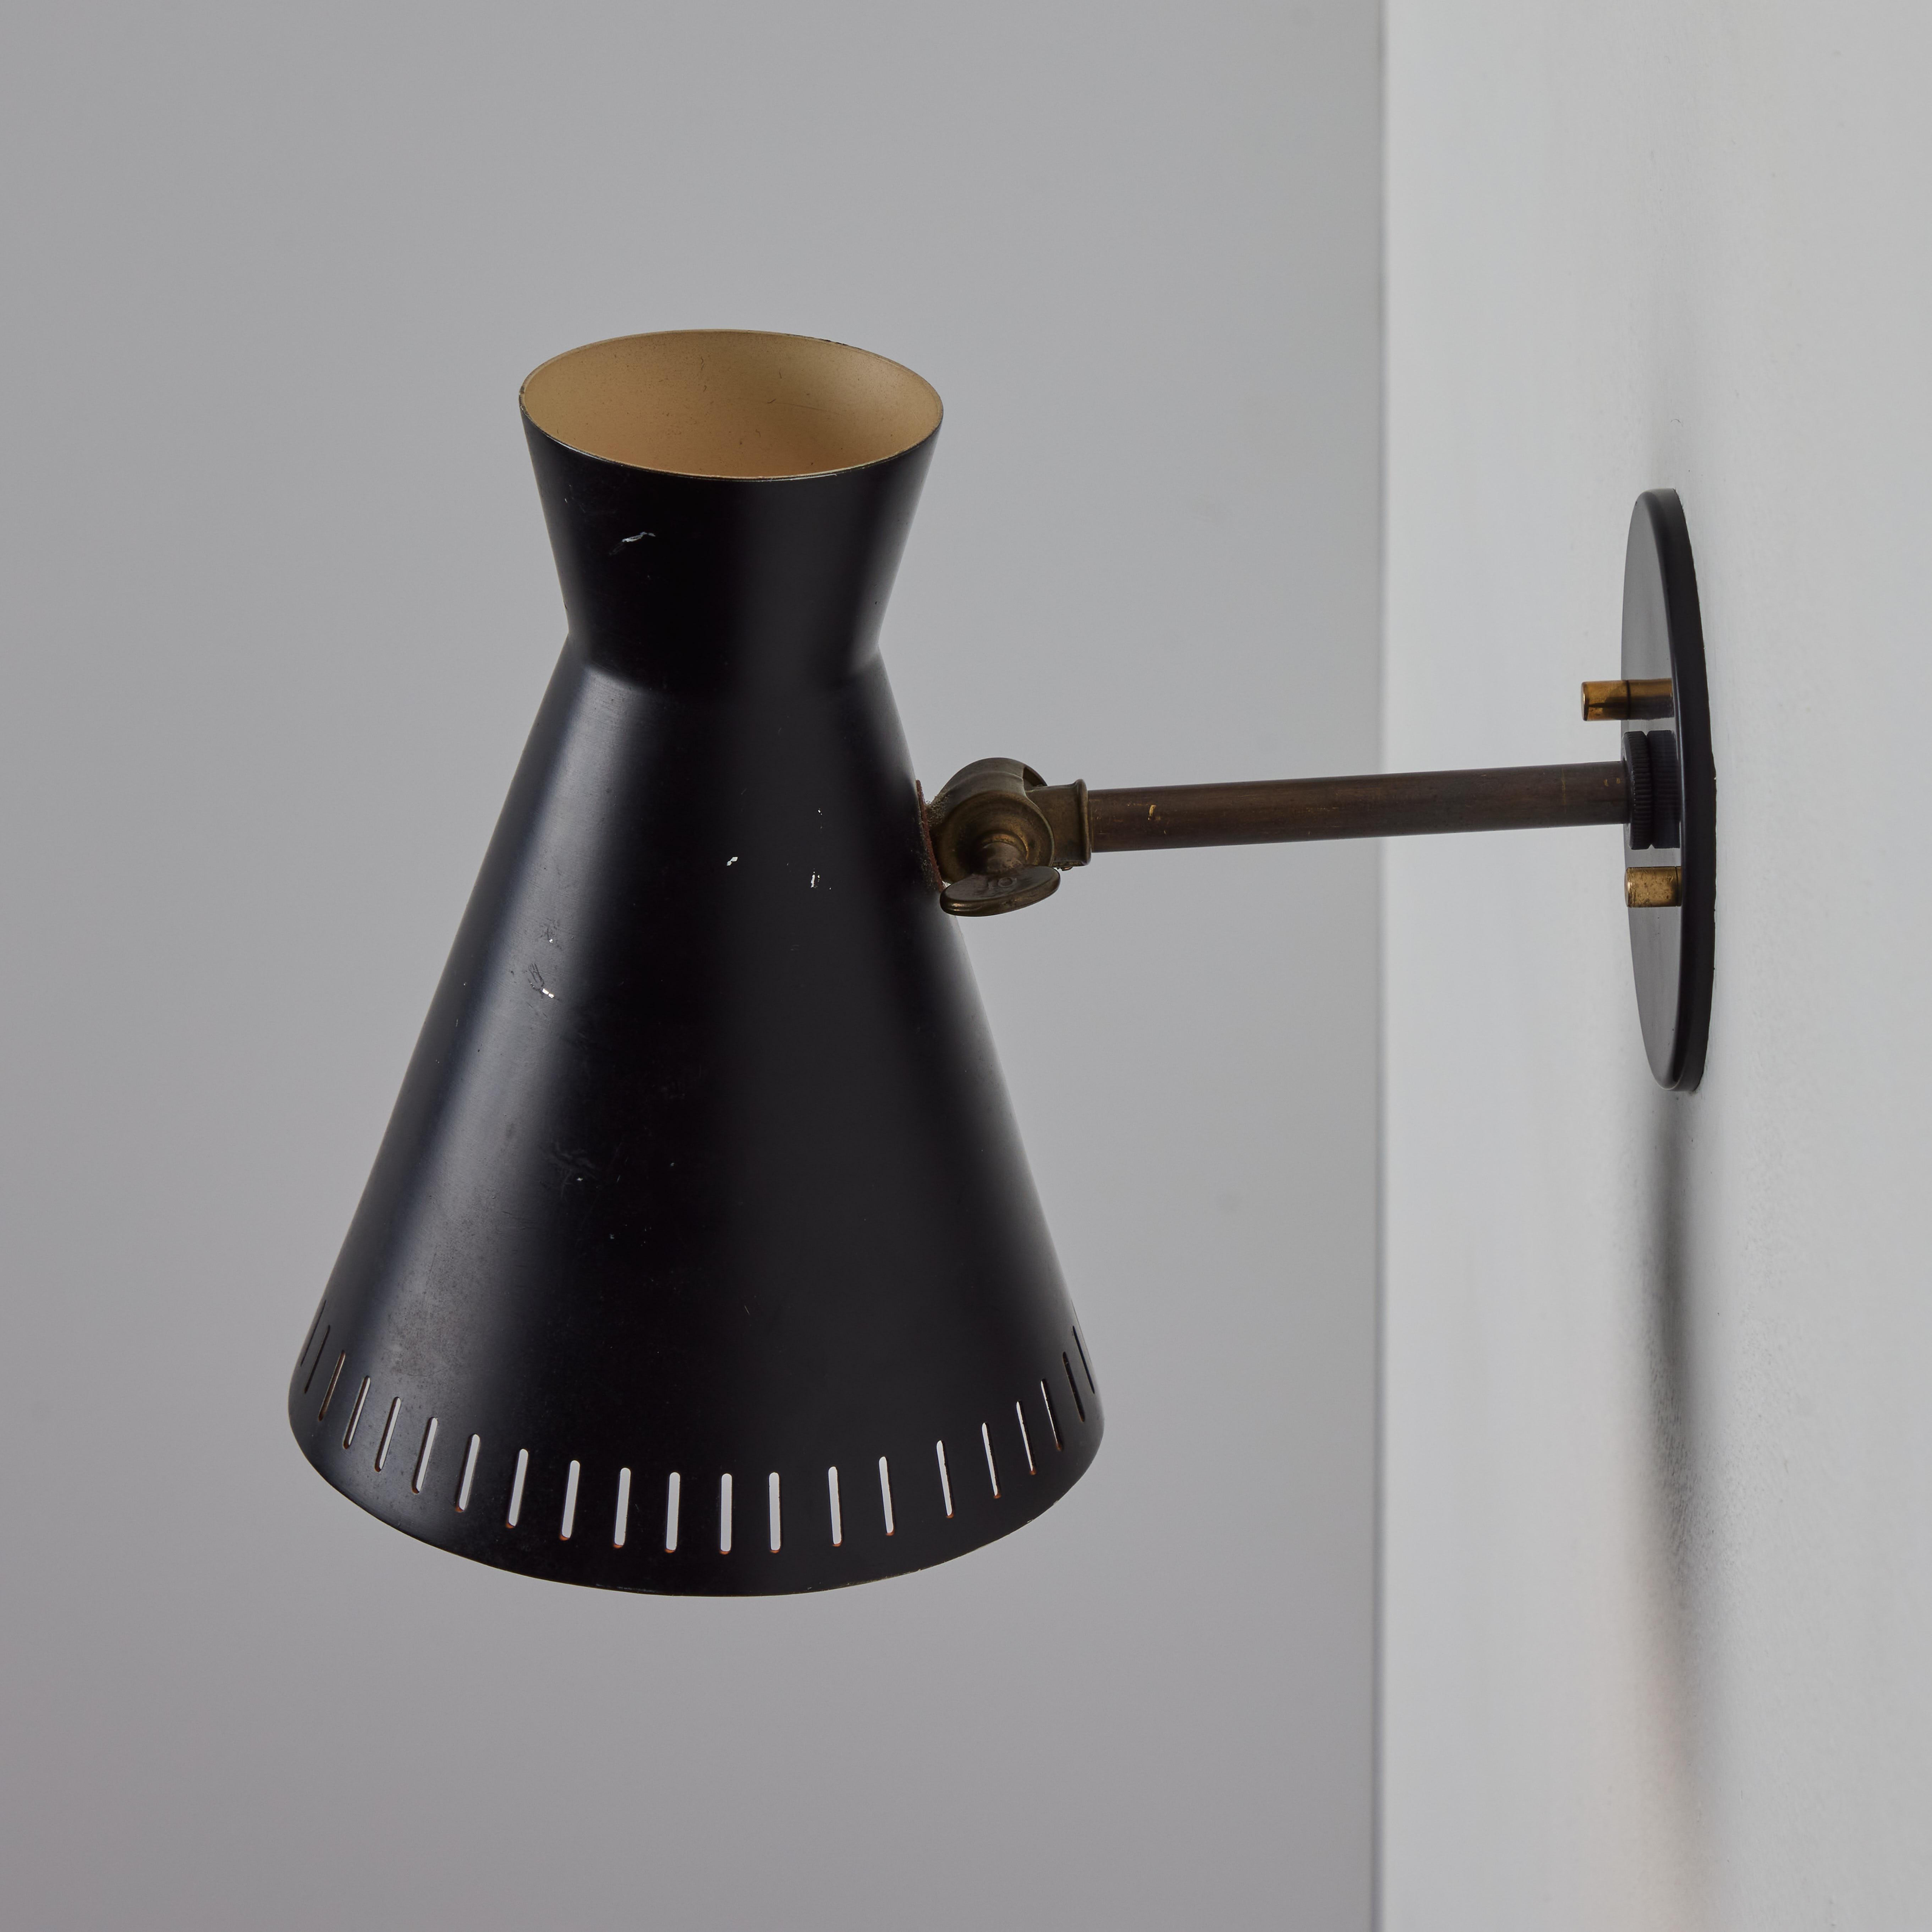 1950s Perforated Black Metal Diabolo Wall Lamp Attributed to Mauri Almari For Sale 2